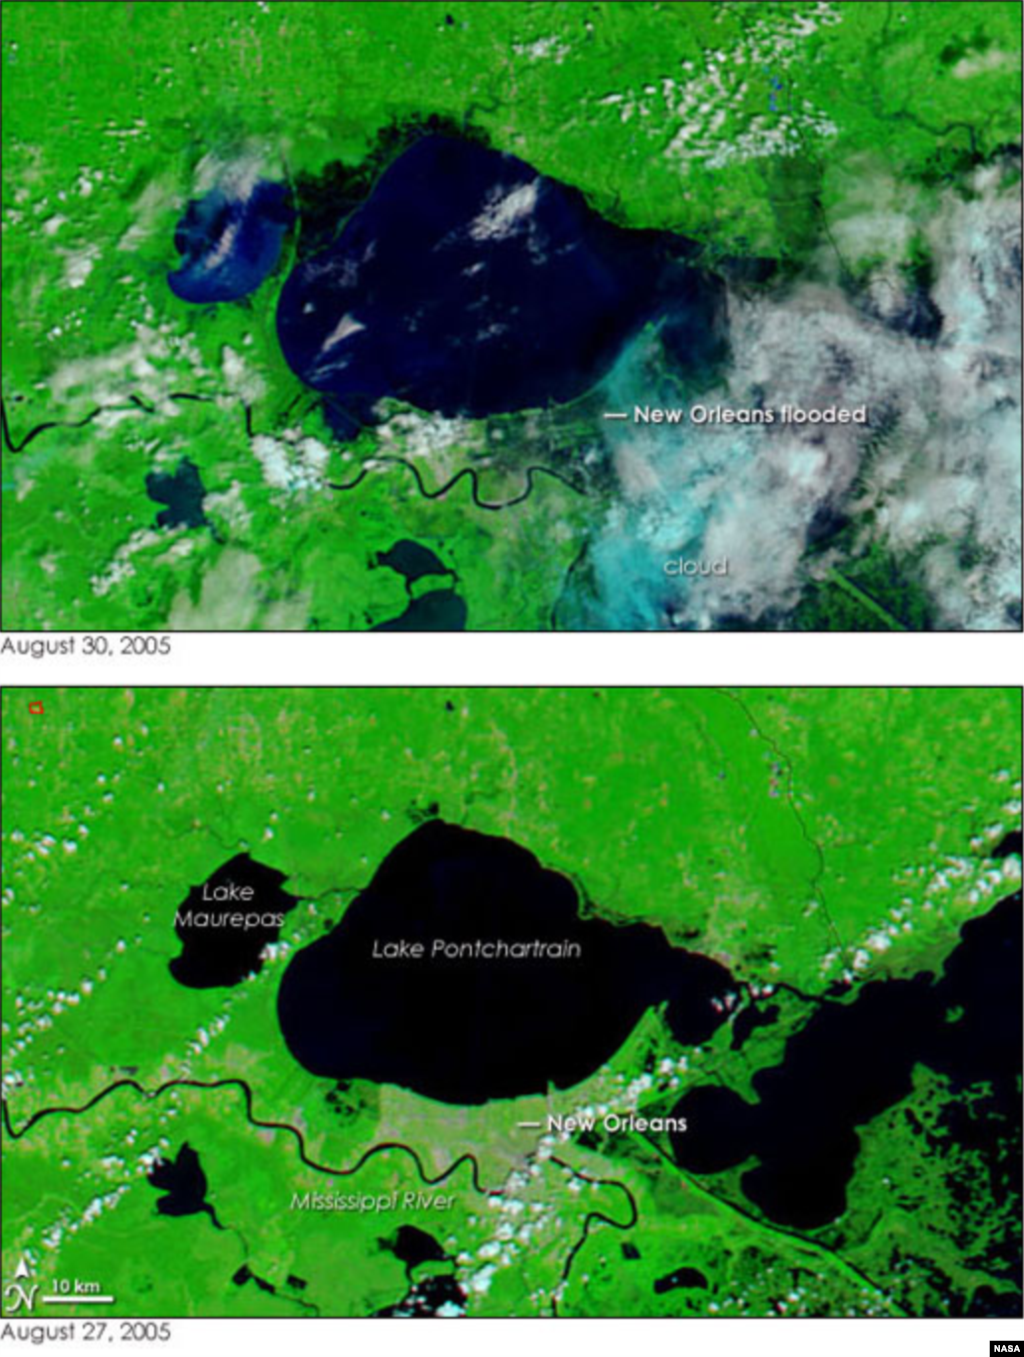 NASA images of New Orleans, before (Aug. 27, 2005) and after (Aug. 30, 2015) Hurricane Katrina.